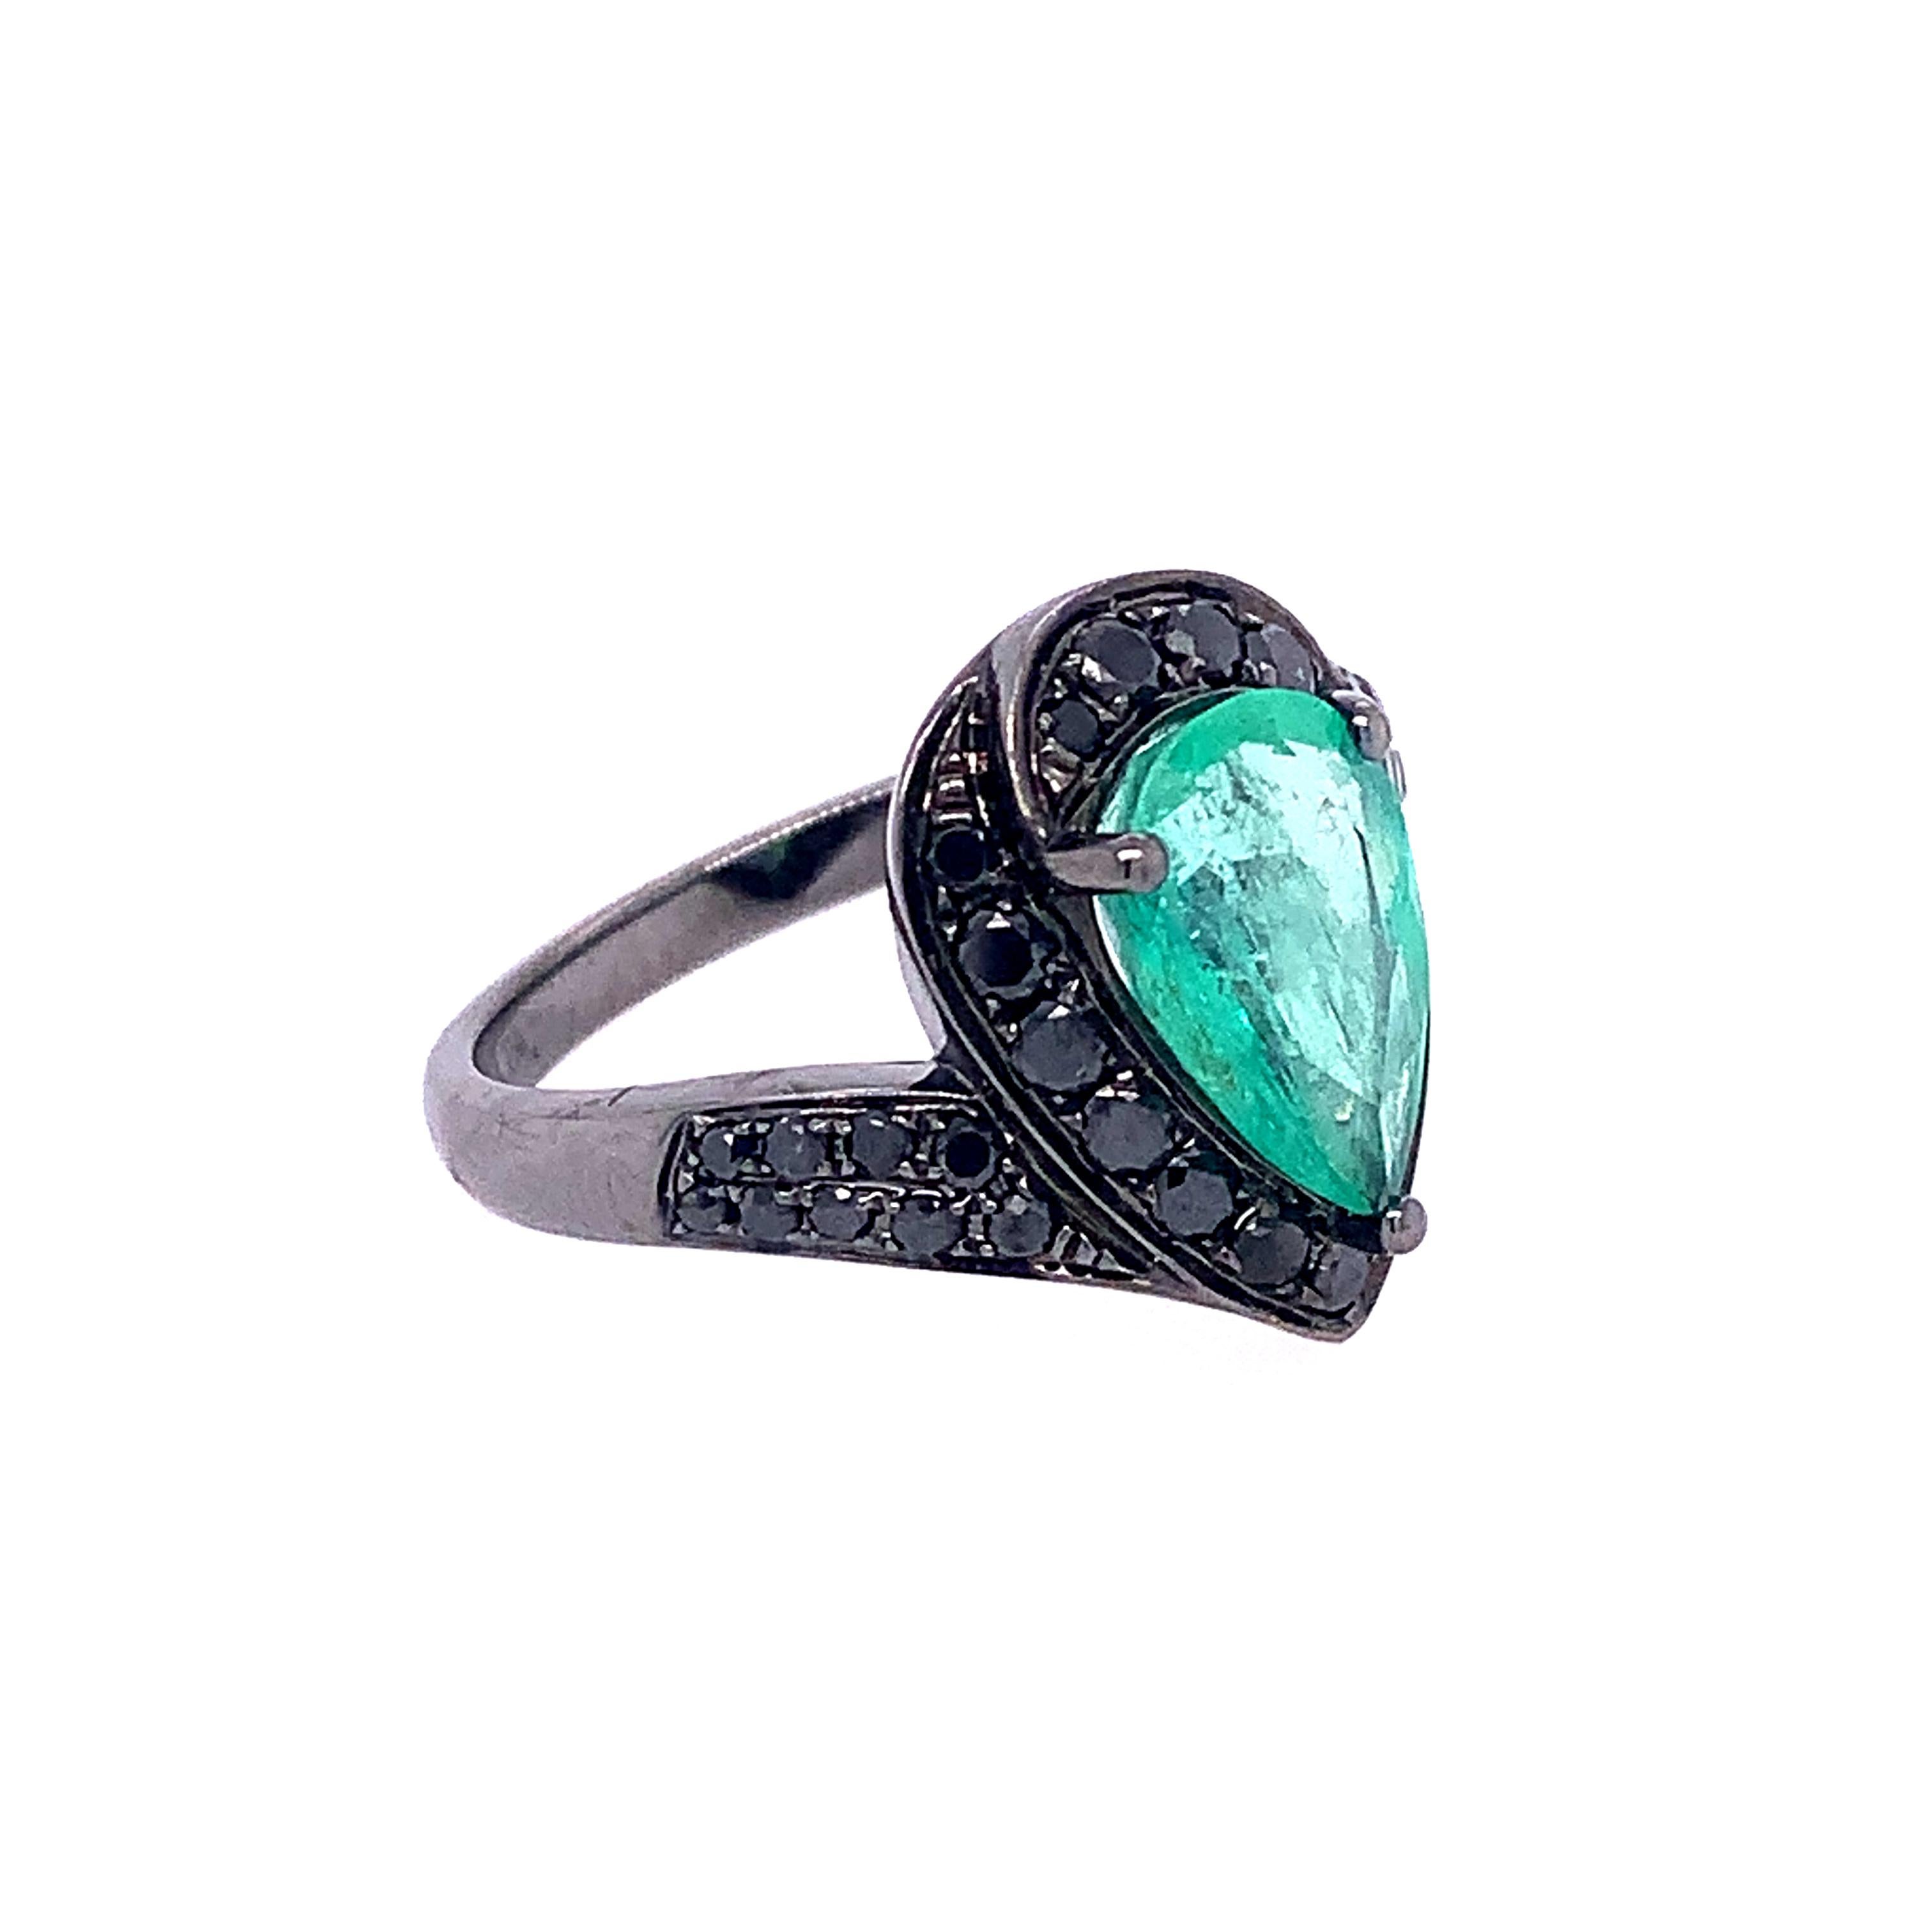 Lagoon Collection,

Pear shape Emerald center with black Diamonds accent set in 18k blackened gold. Ring size 7 U.S.

Emerald: 1.78ct total weight.
Black Diamond: 0.65ct total weight.
